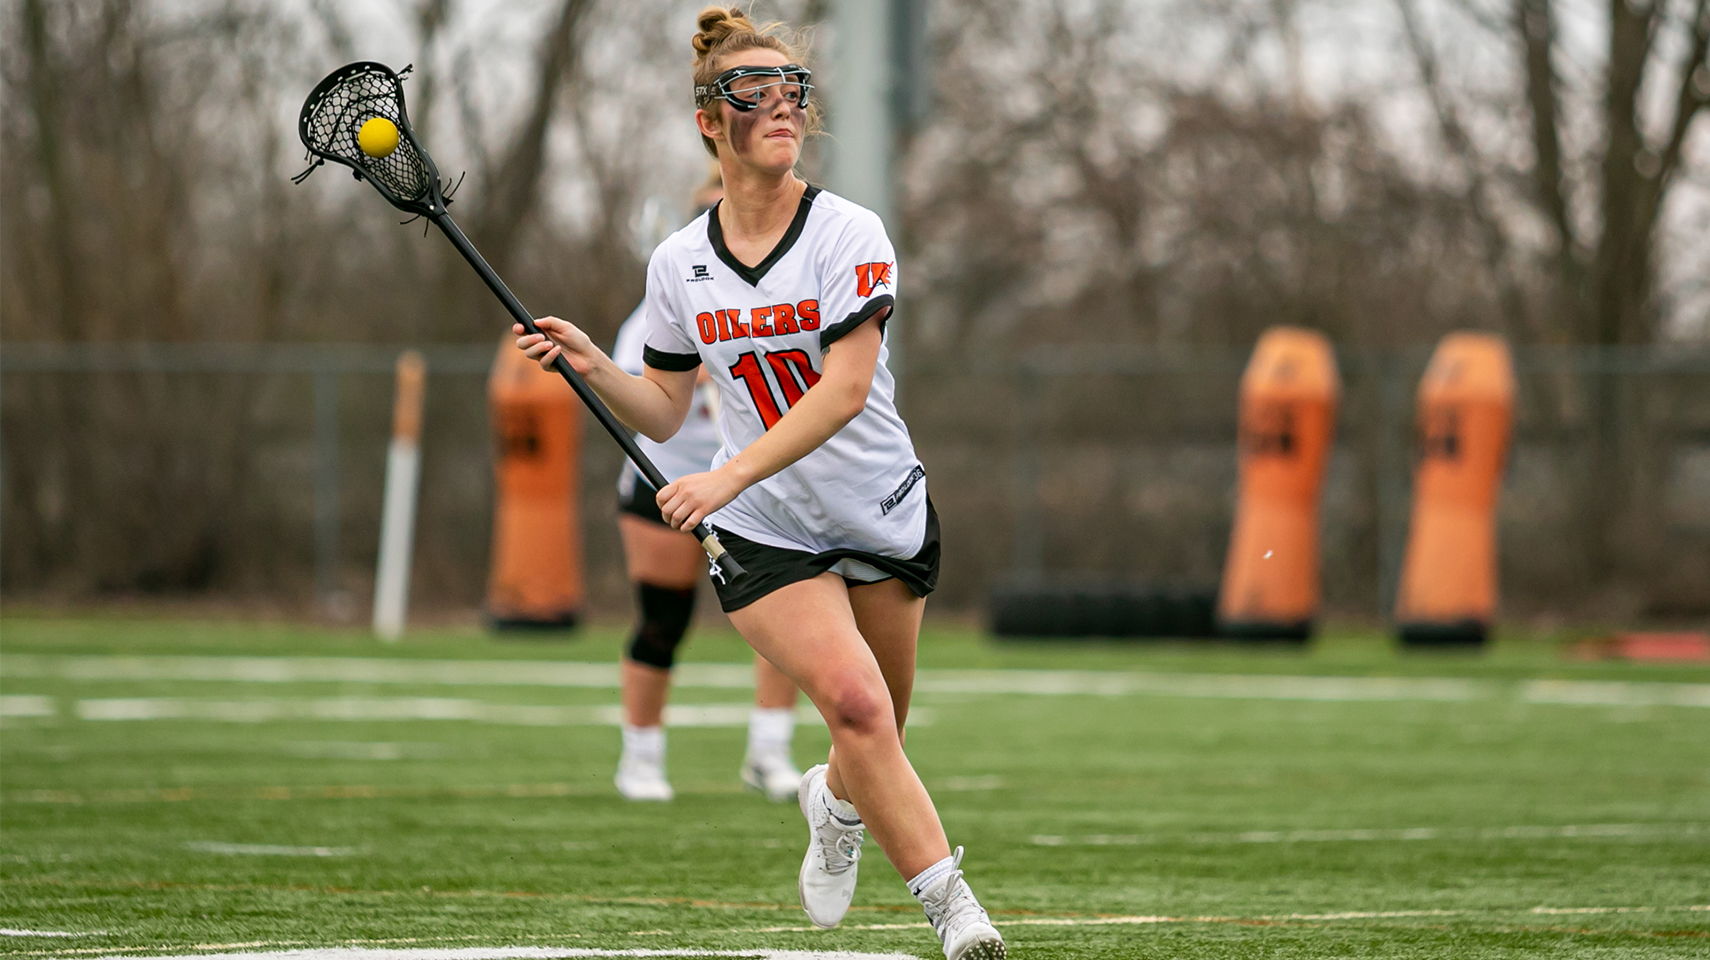 Women's lacrosse player running down the field with her ball in the stick